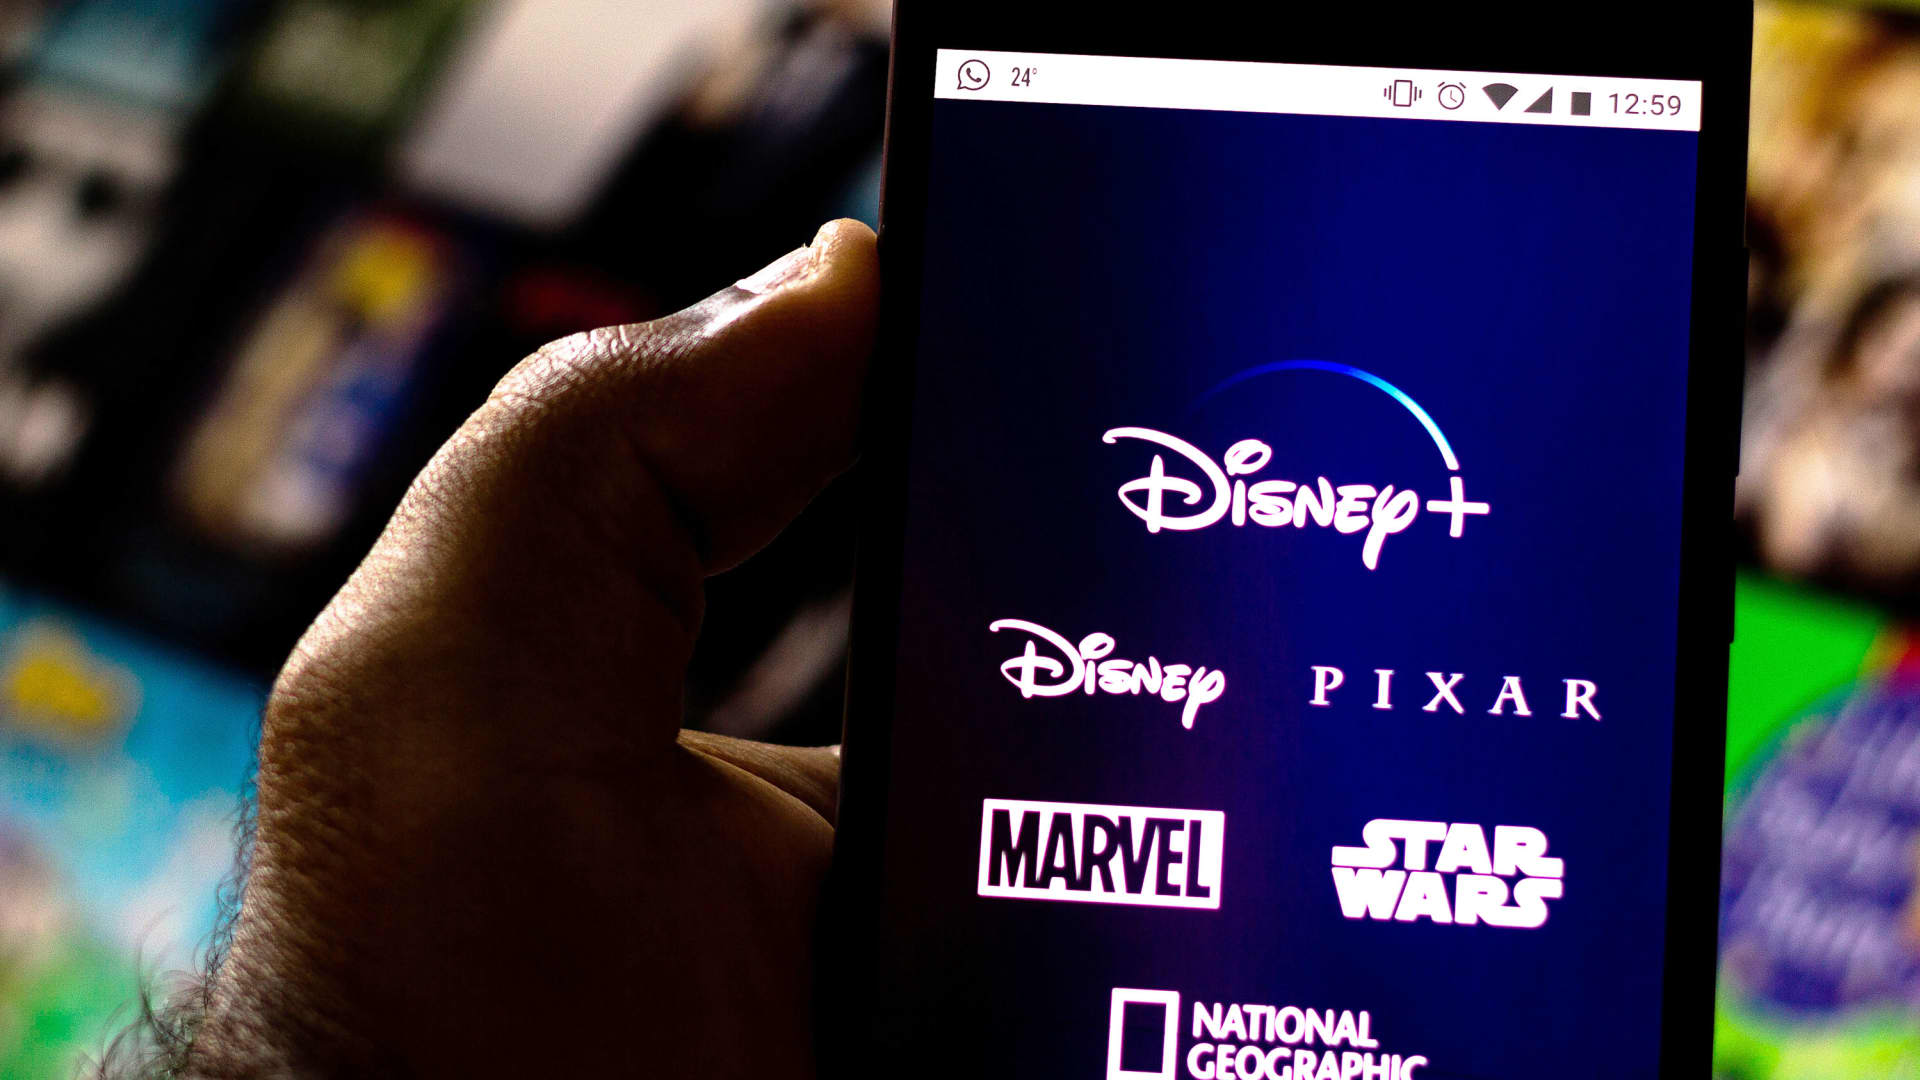 The Disney+ (Plus) logo is seen displayed on a smartphone.